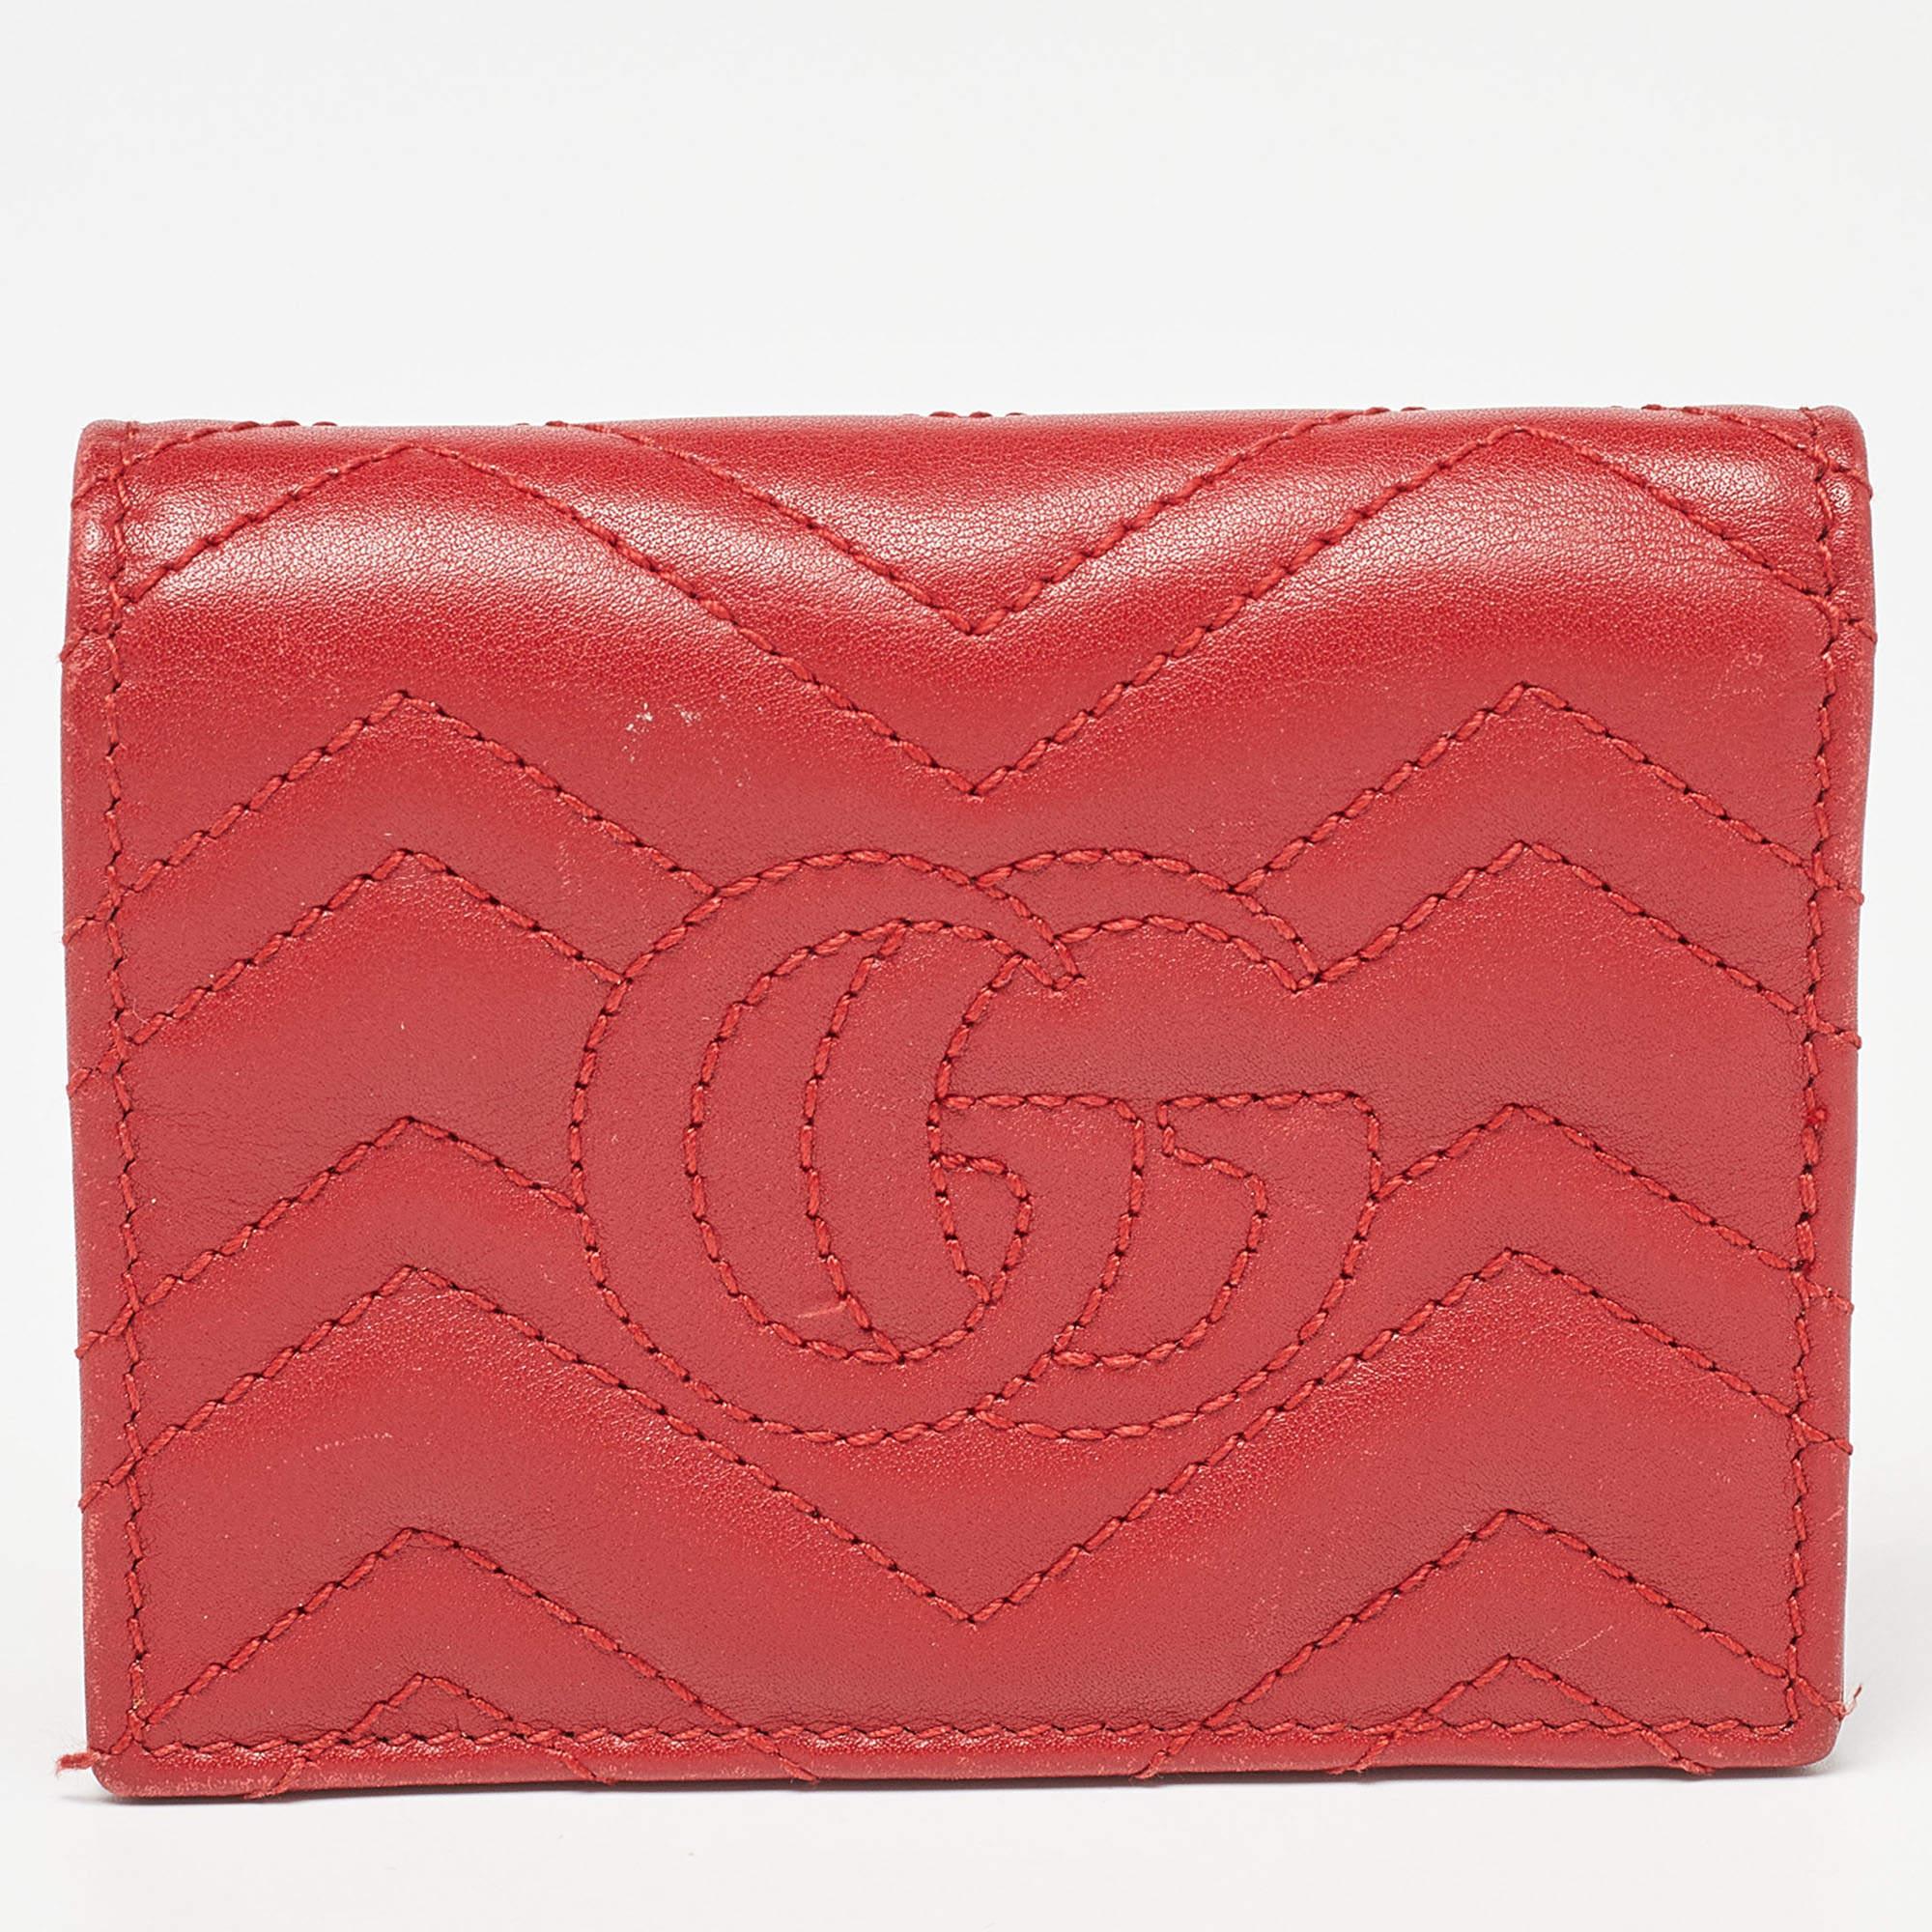 The Gucci card case is a luxurious accessory crafted from rich red matelassé leather. It features the iconic GG logo pattern, a flap closure, and multiple card slots for organization. This compact, stylish case embodies Gucci's timeless elegance and